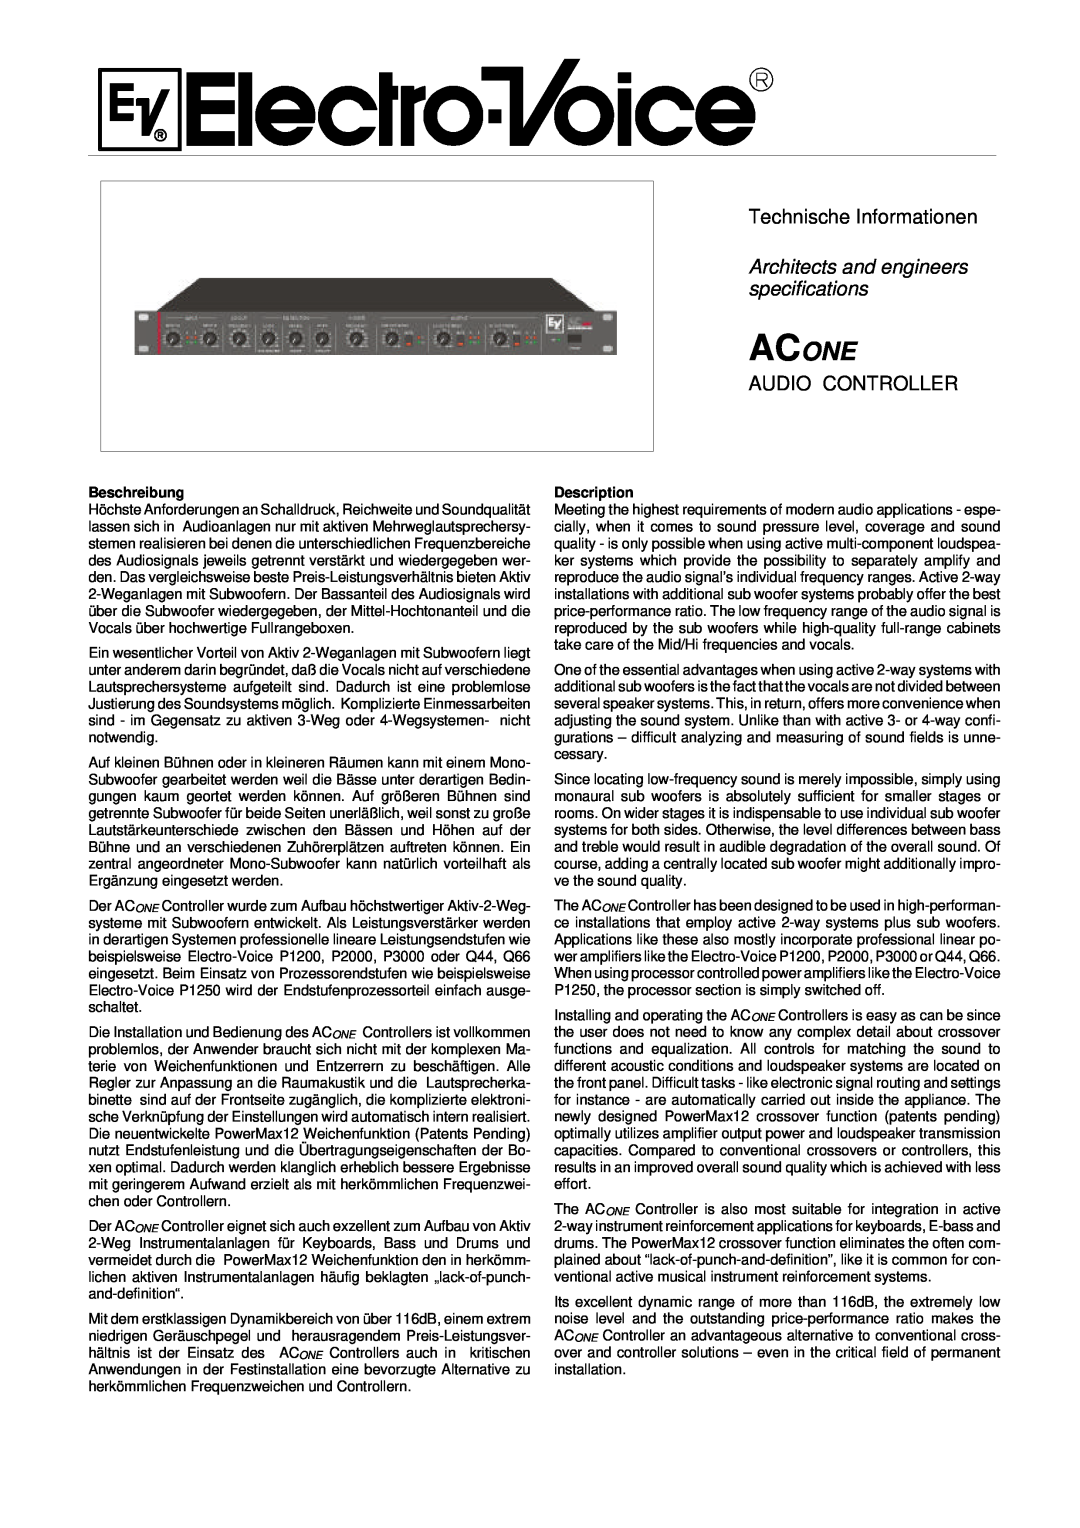 Electro-Voice Stereo System specifications Acone, Technische Informationen, Architects and engineers specifications 